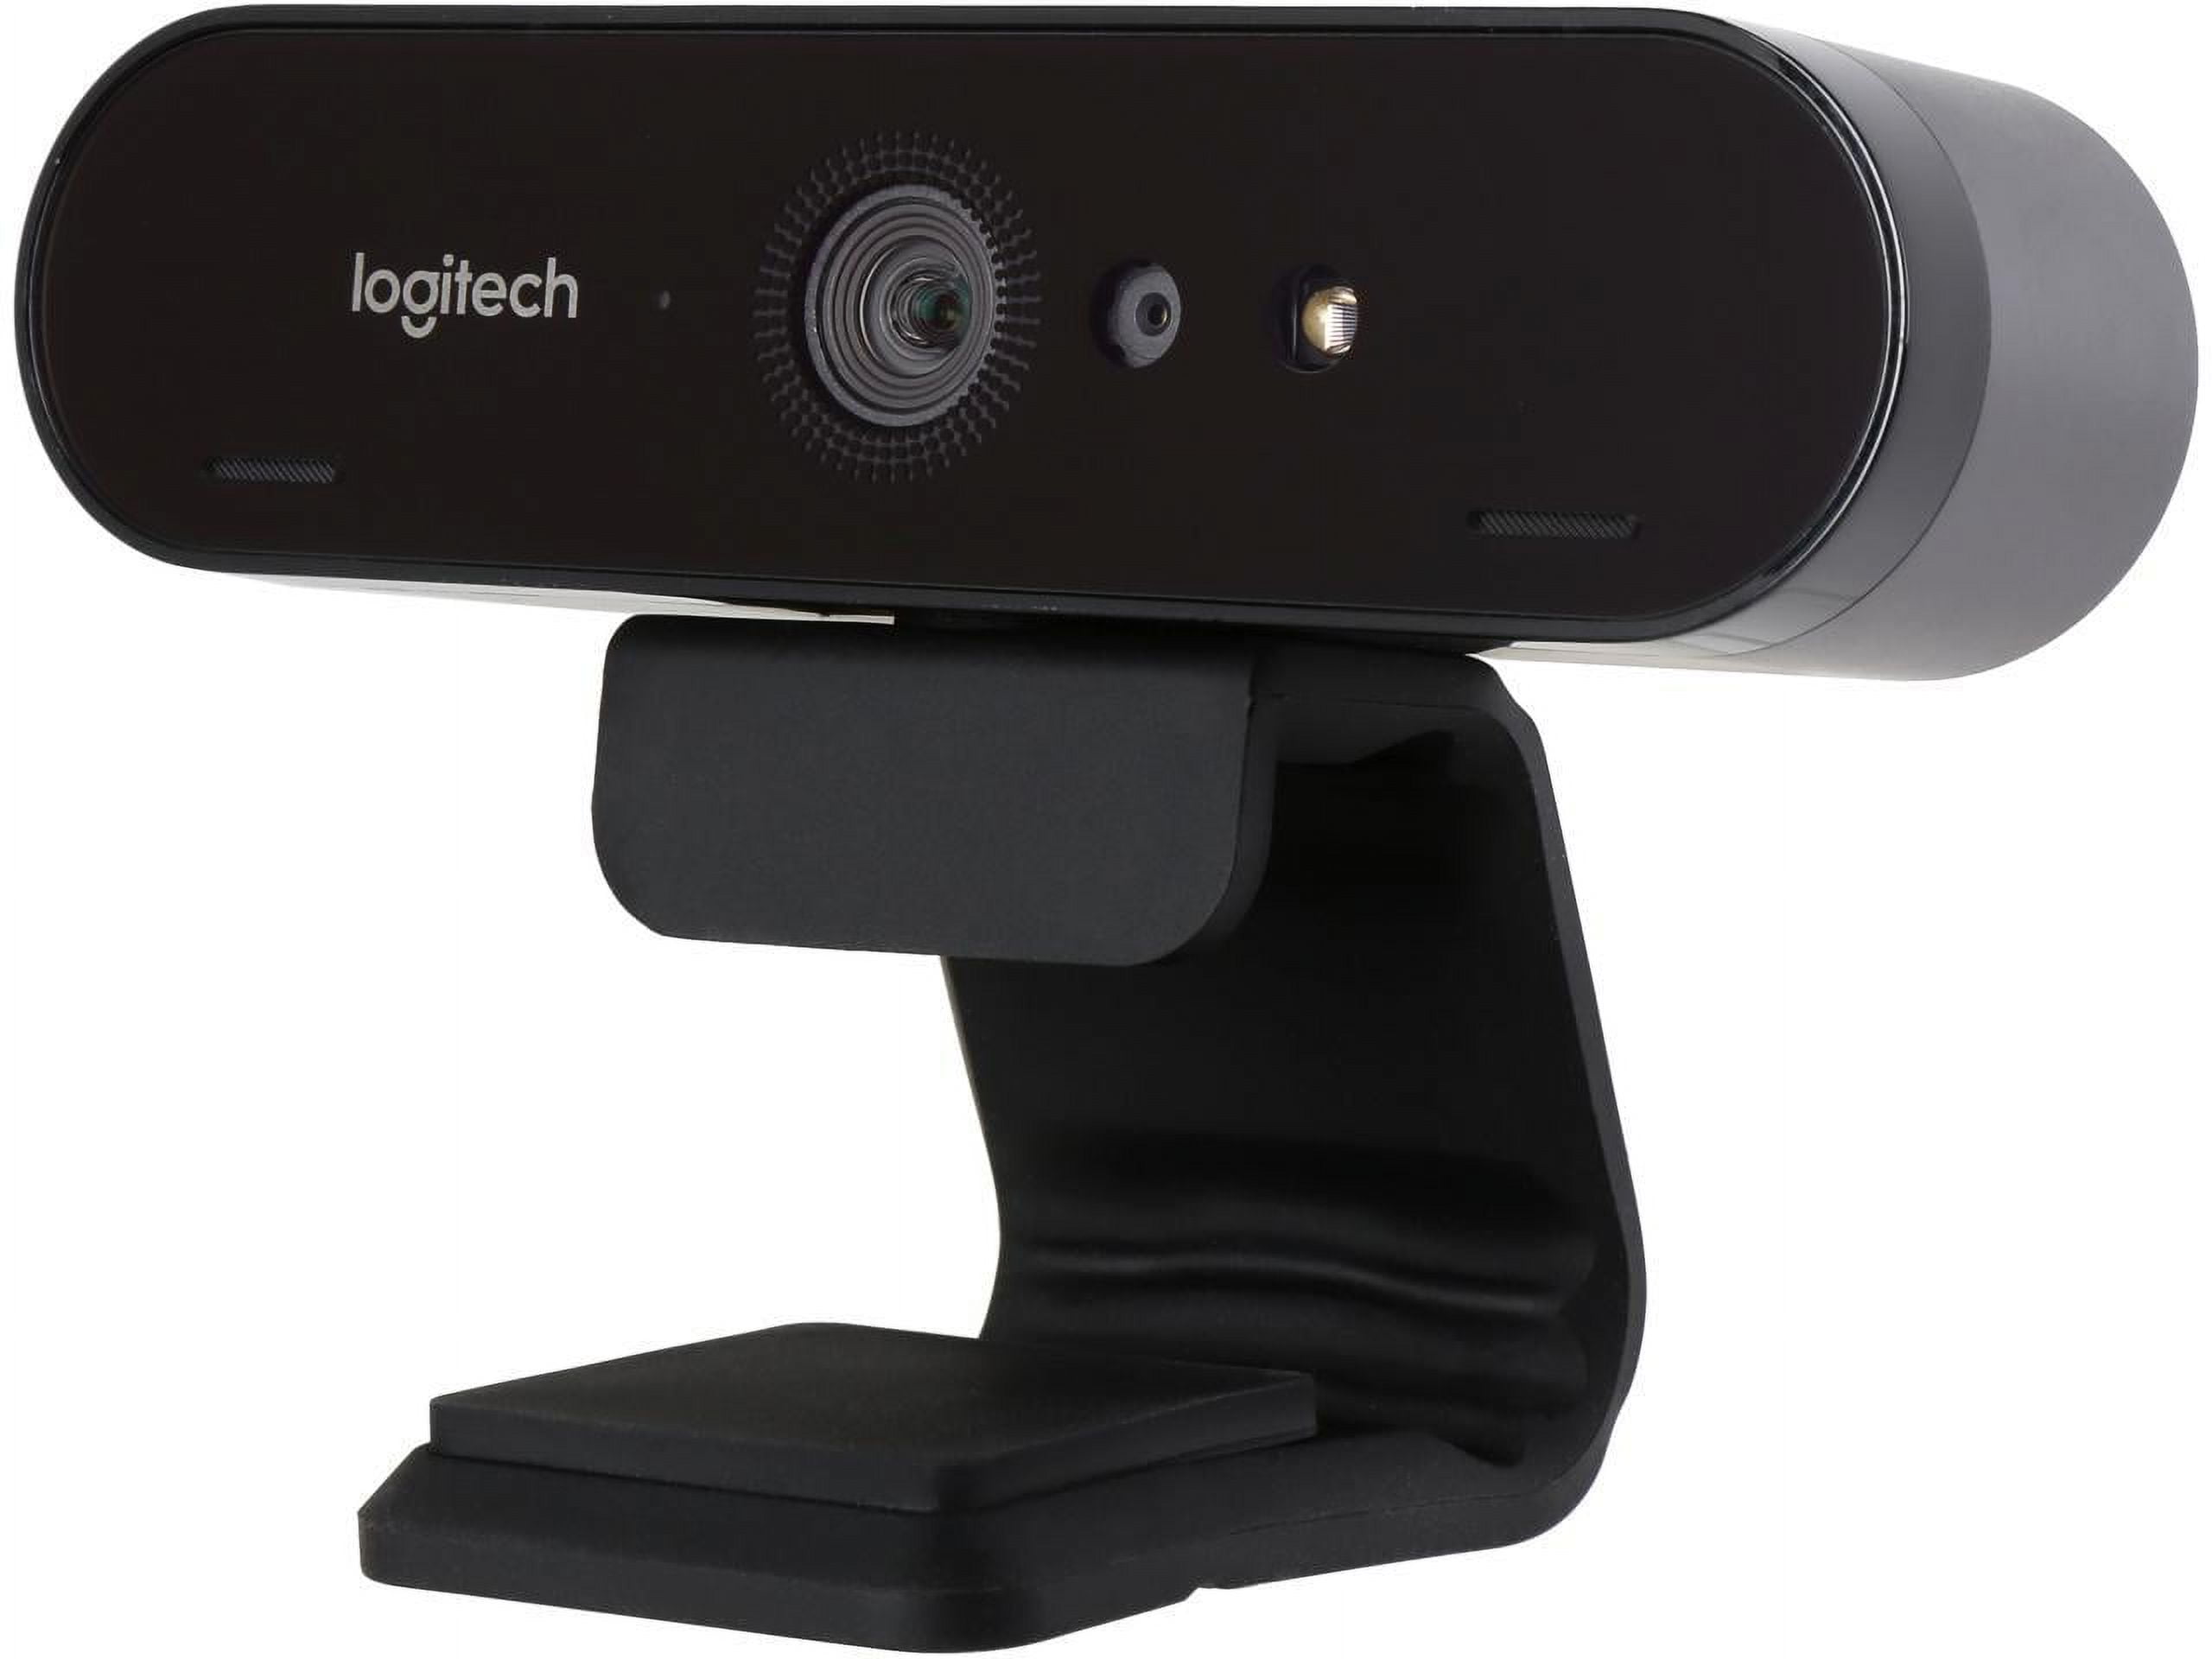 HD Auto Voice, Calling, PC/Mac/Laptop/Macbook/Tablet View, 4K Field Webcam, with Google 4K Video Brio Works of Correction, Noise-Canceling Ultra Zoom, Logitech Light Wide mic, Teams, Microsoft HD